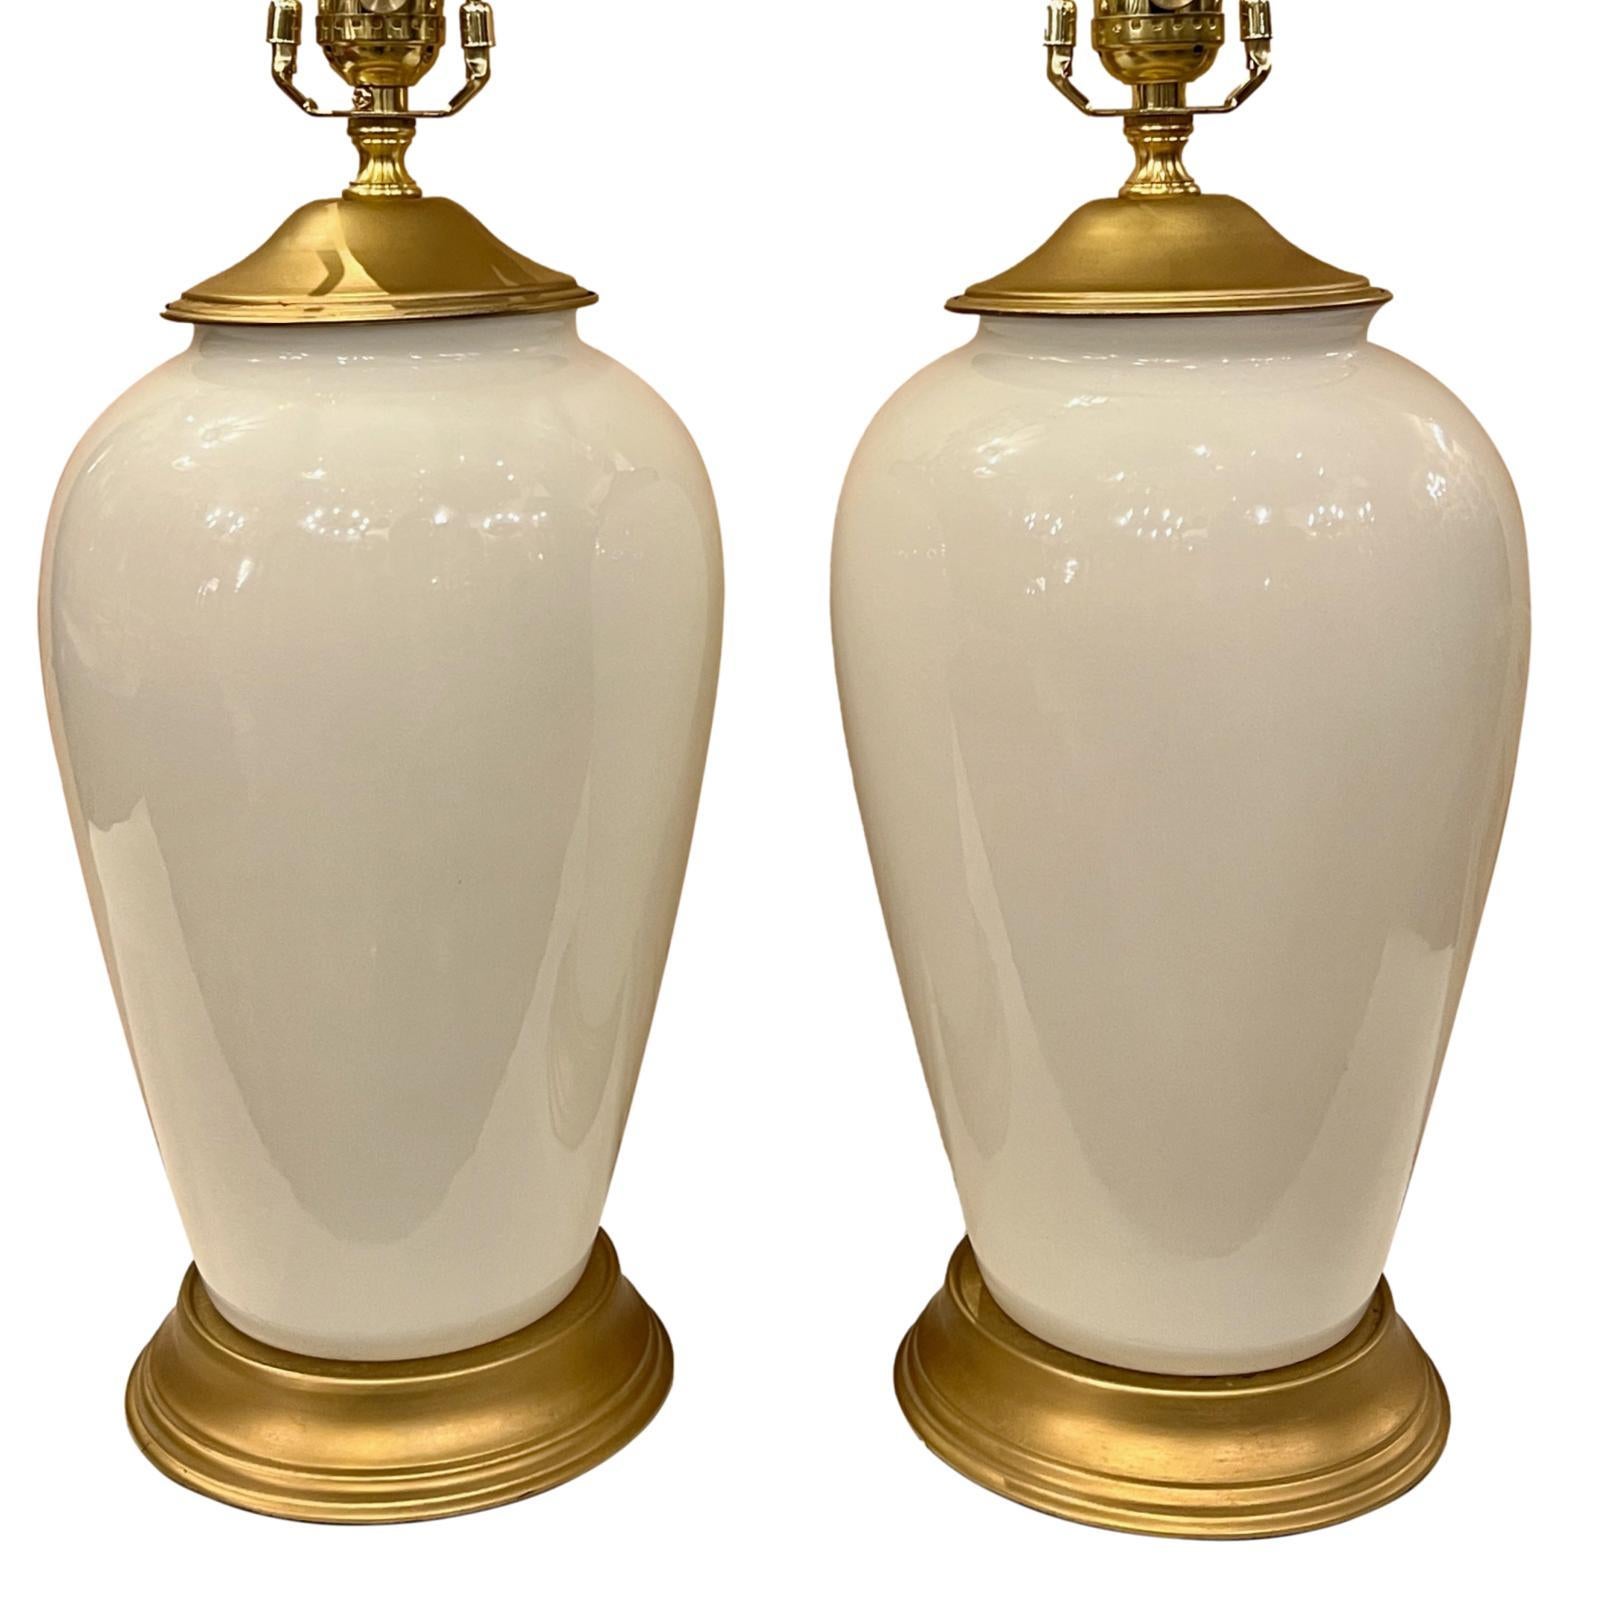 Pair of circa 1950's French opaline glass lamps with gilt bases.

Measurements:
Height of body: 14